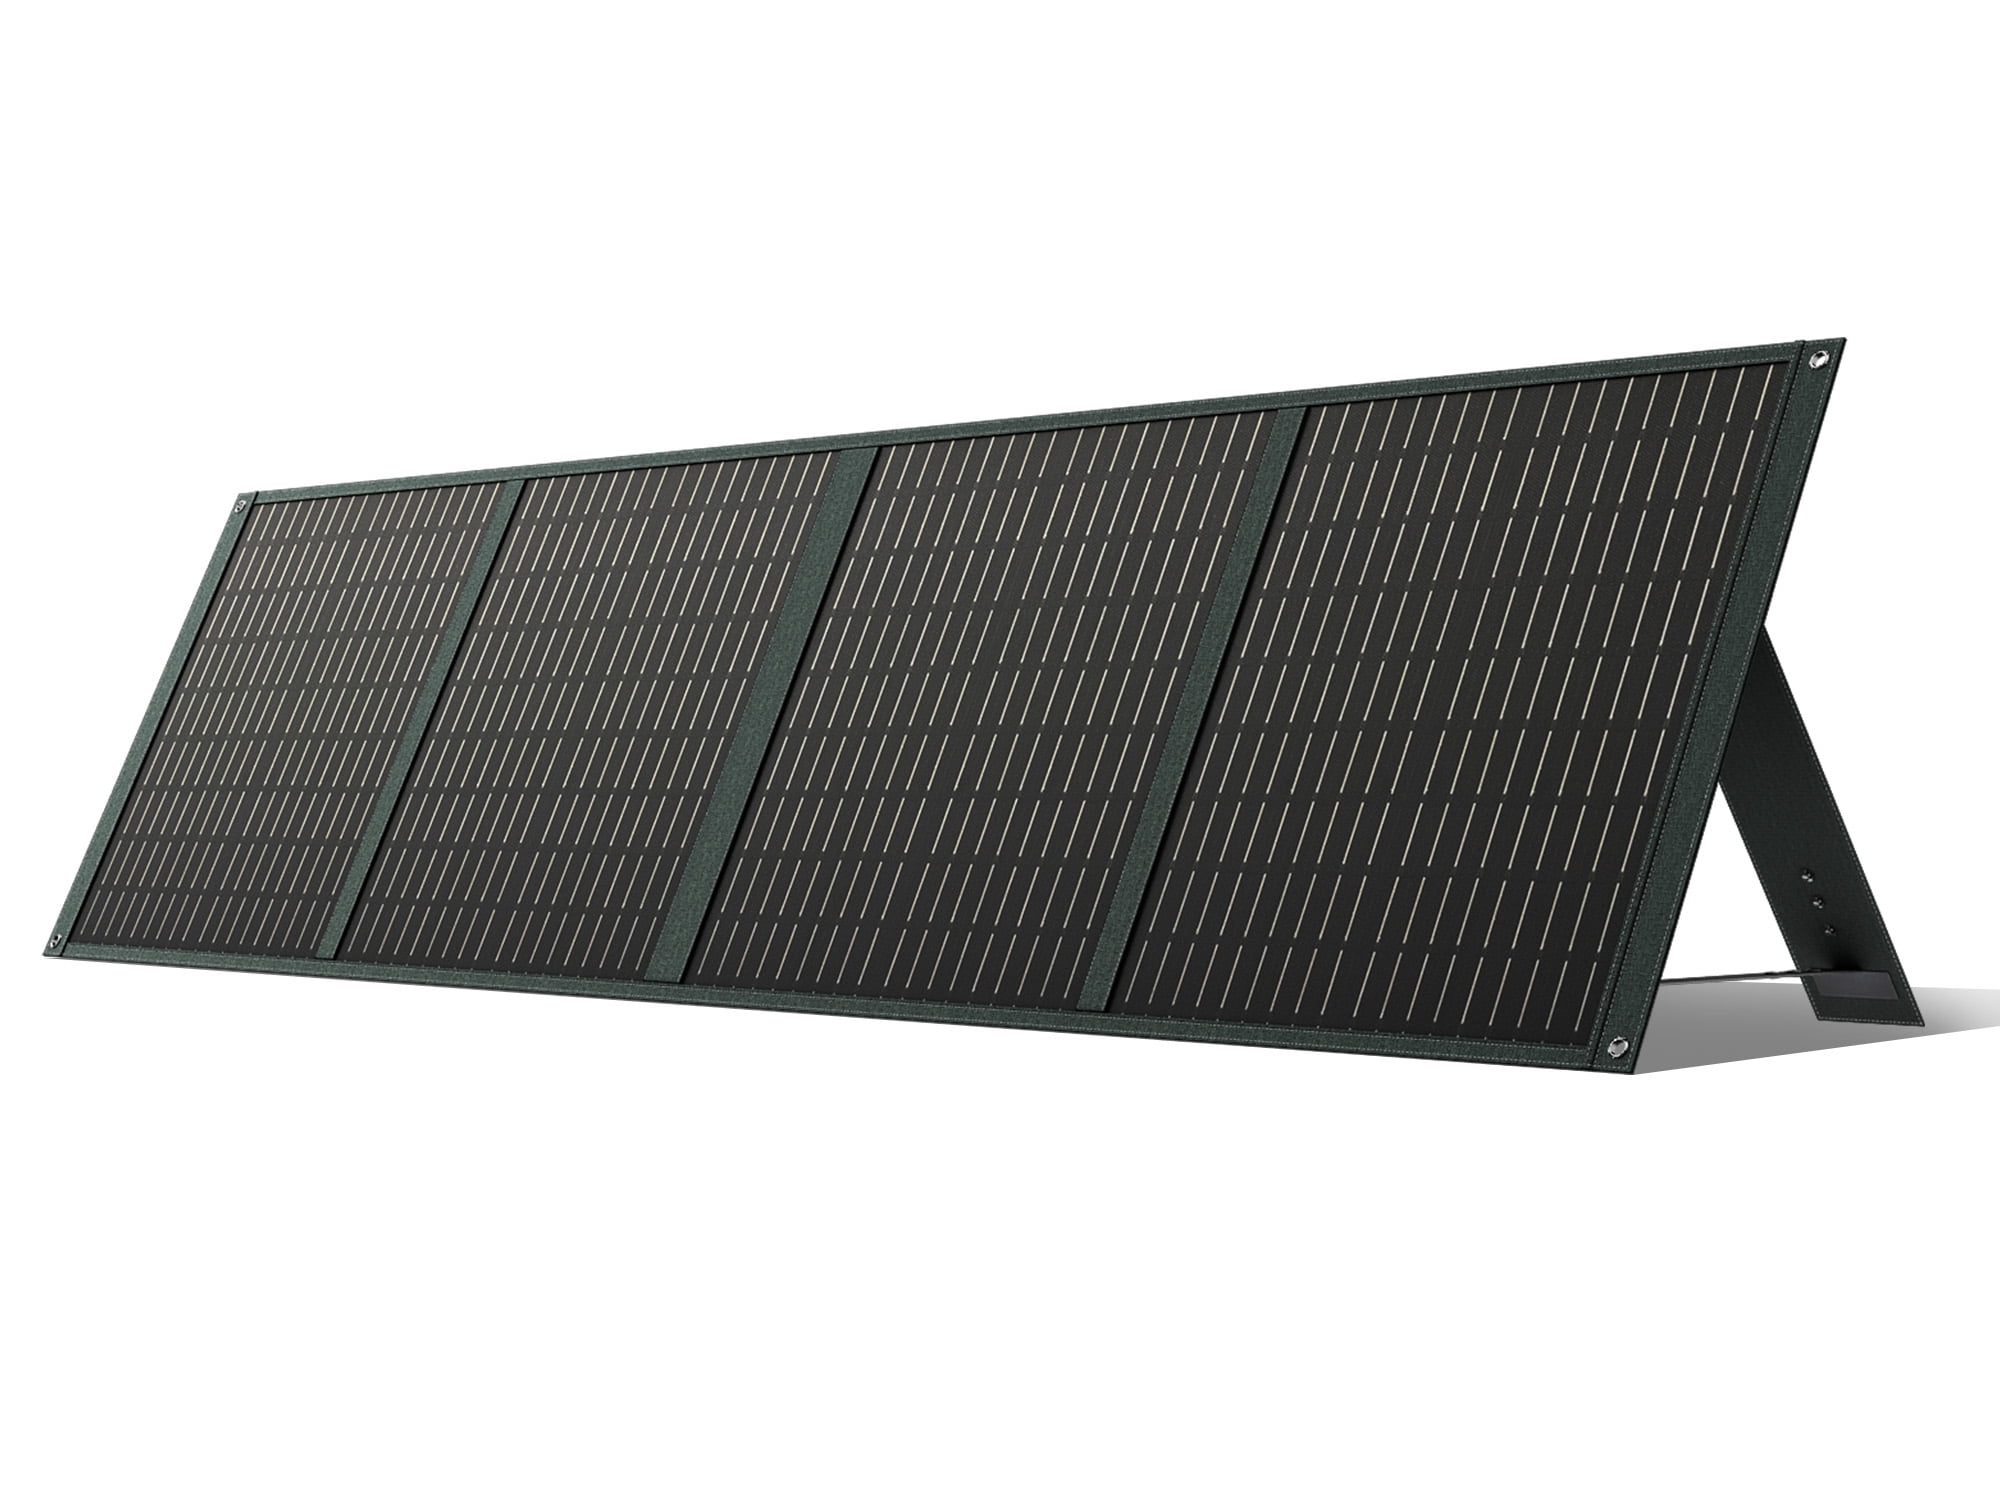 POWERWIN Solar Panel,100w Solar Panel Charger with Adjustable Kickstand ...